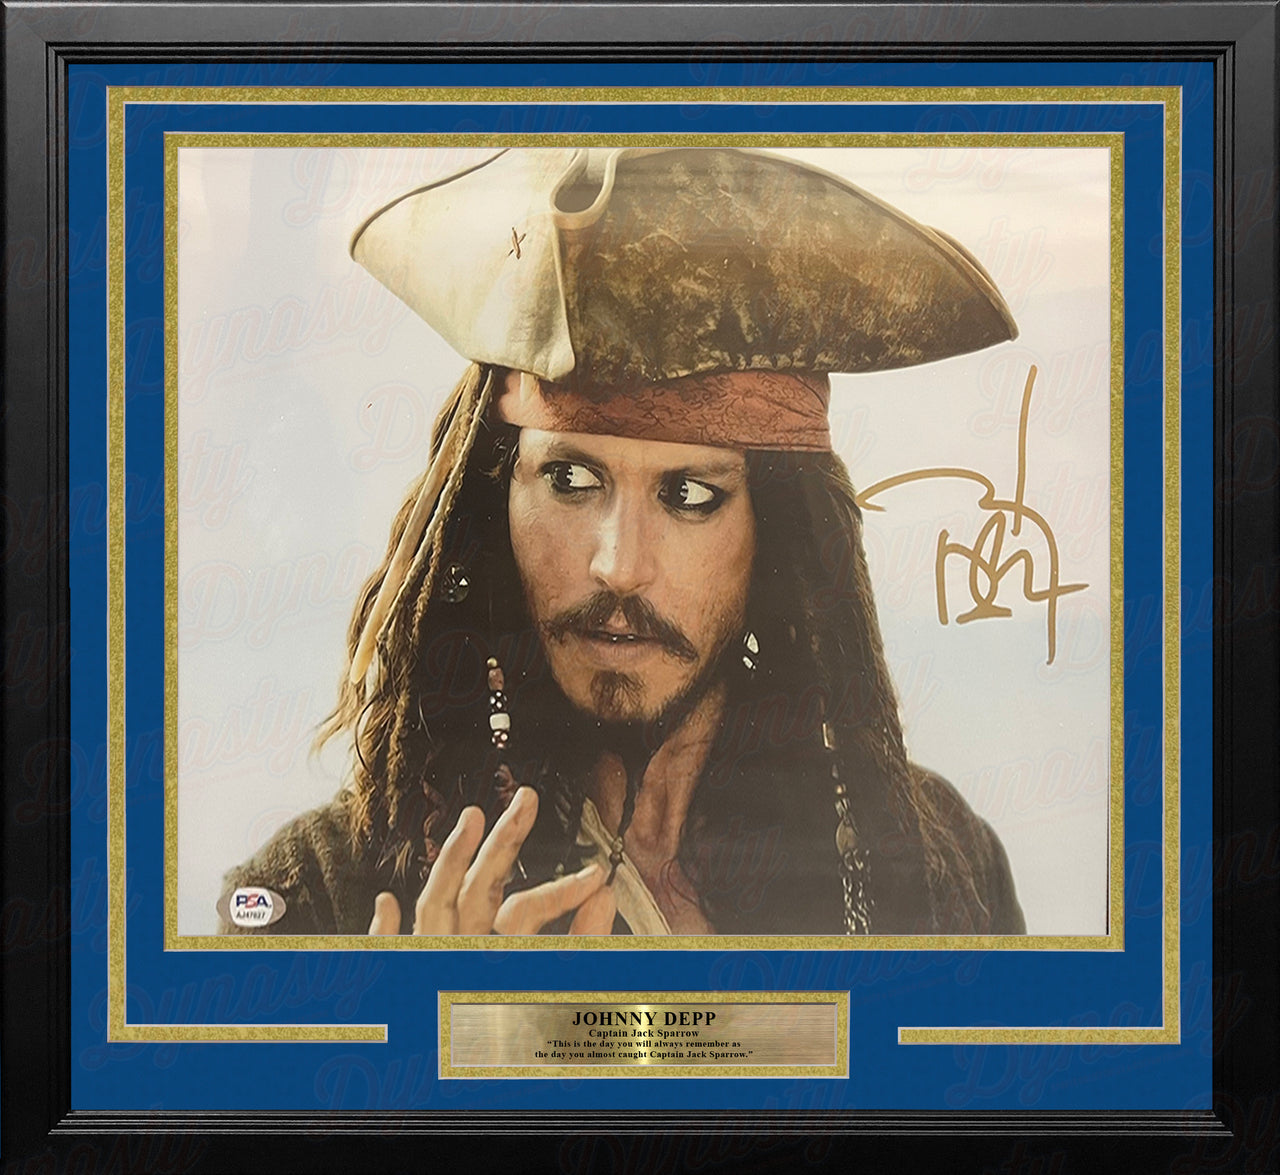 Johnny Depp Autographed Pirates of the Caribbean 11" x 14" Framed Studio Photo - Dynasty Sports & Framing 